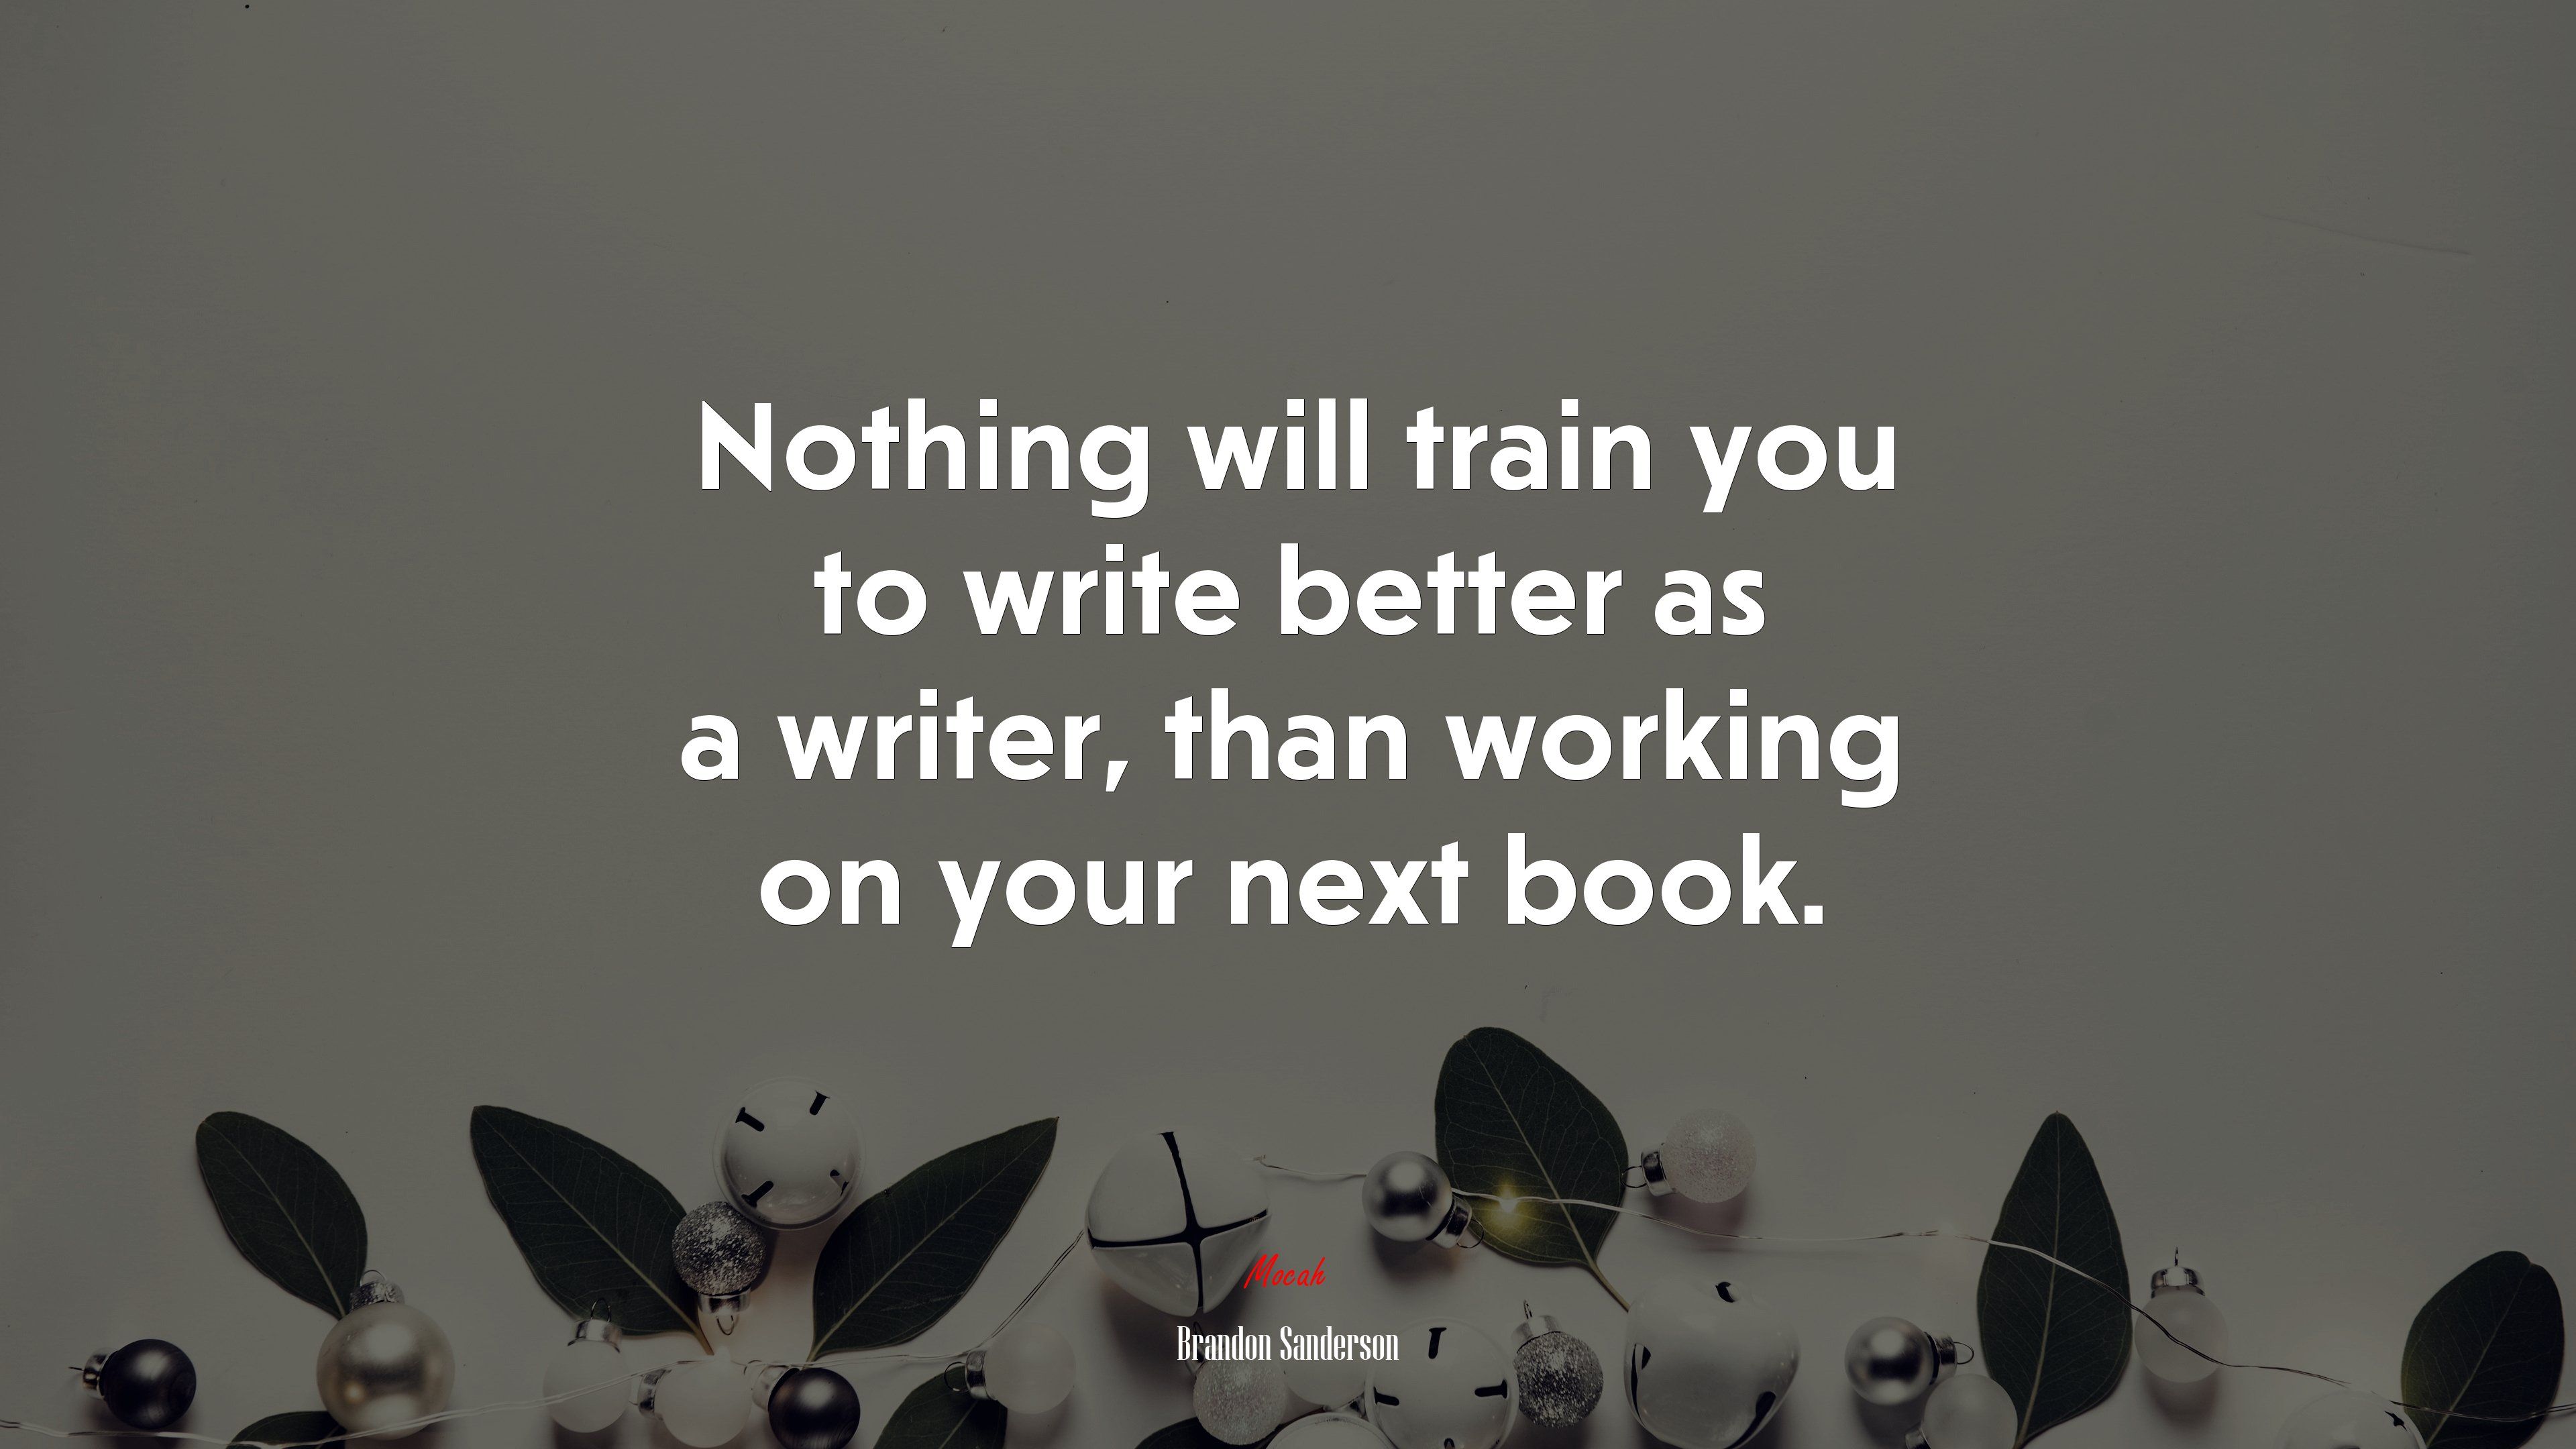 Nothing will train you to write better as a writer, than working on your next book. Brandon Sanderson quote, 4k wallpaper. Mocah.org HD Desktop Wallpaper